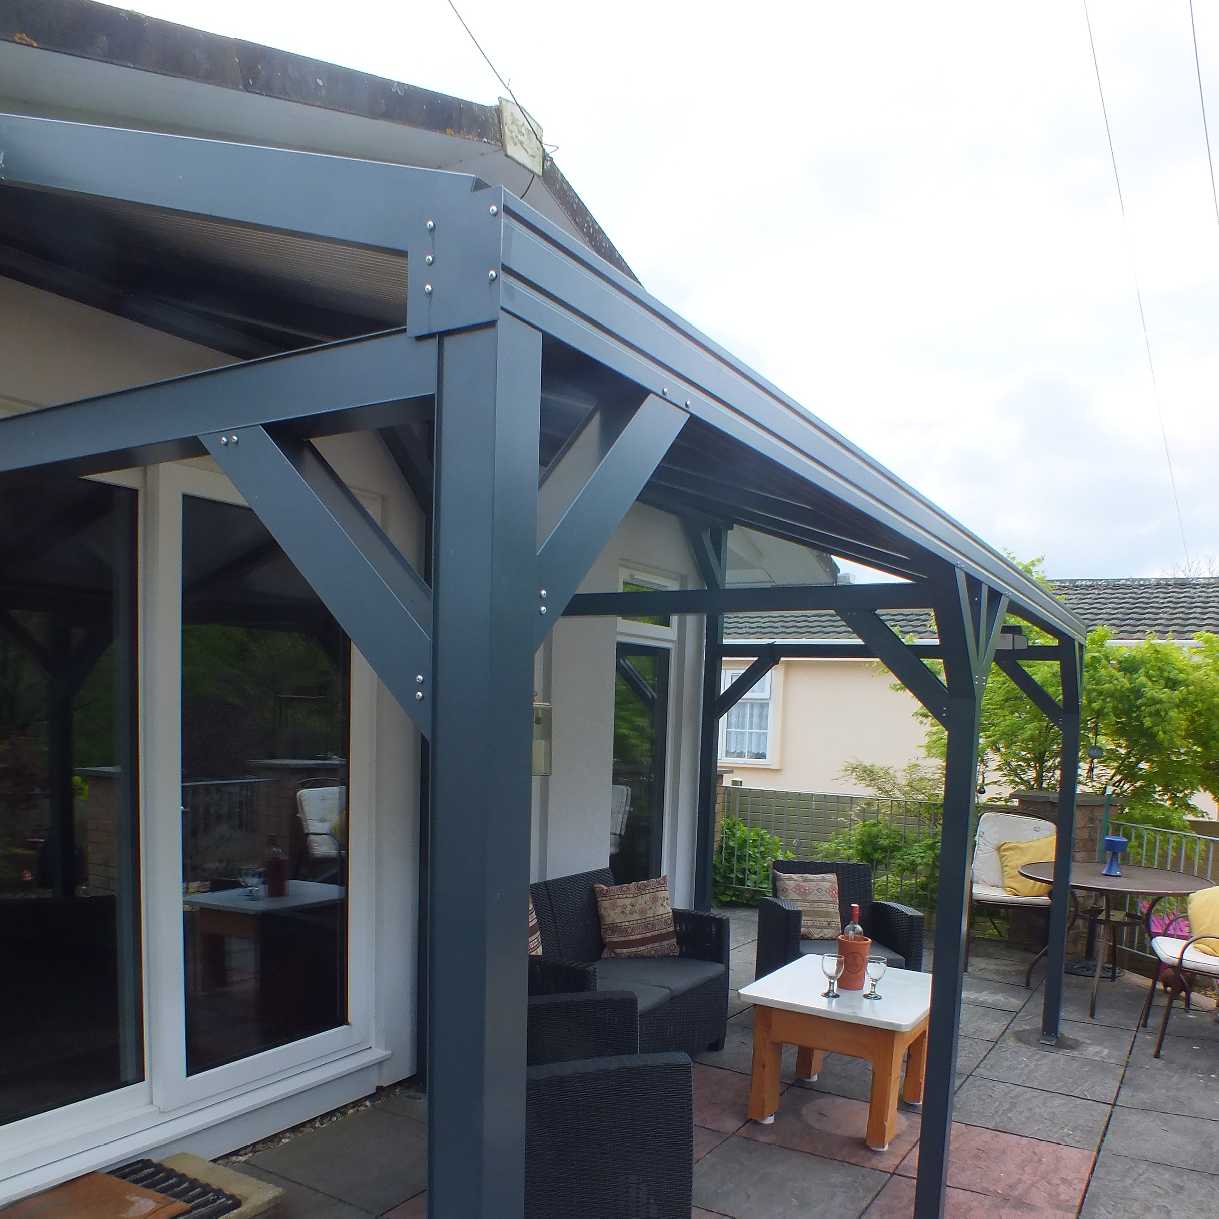 Affordable Omega Smart Free-Standing, Anthracite Grey MonoPitch Roof Canopy with 16mm Polycarbonate Glazing - 5.2m (W) x 2.5m (P), (6) Supporting Posts